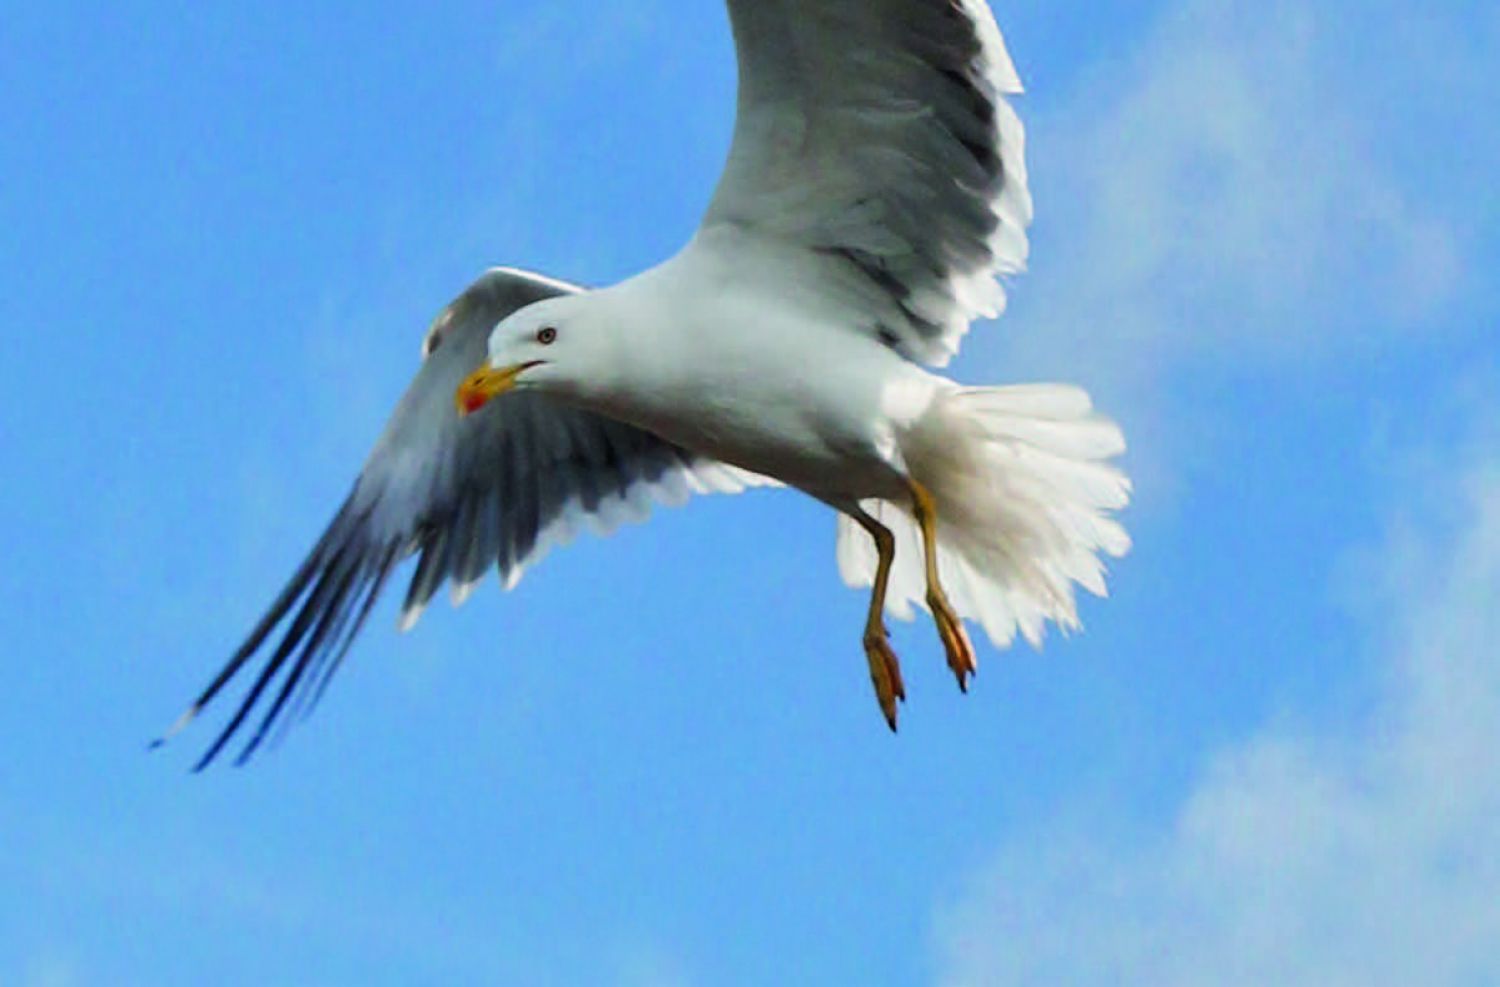 Image of a seagull flying in the air with blue sky background